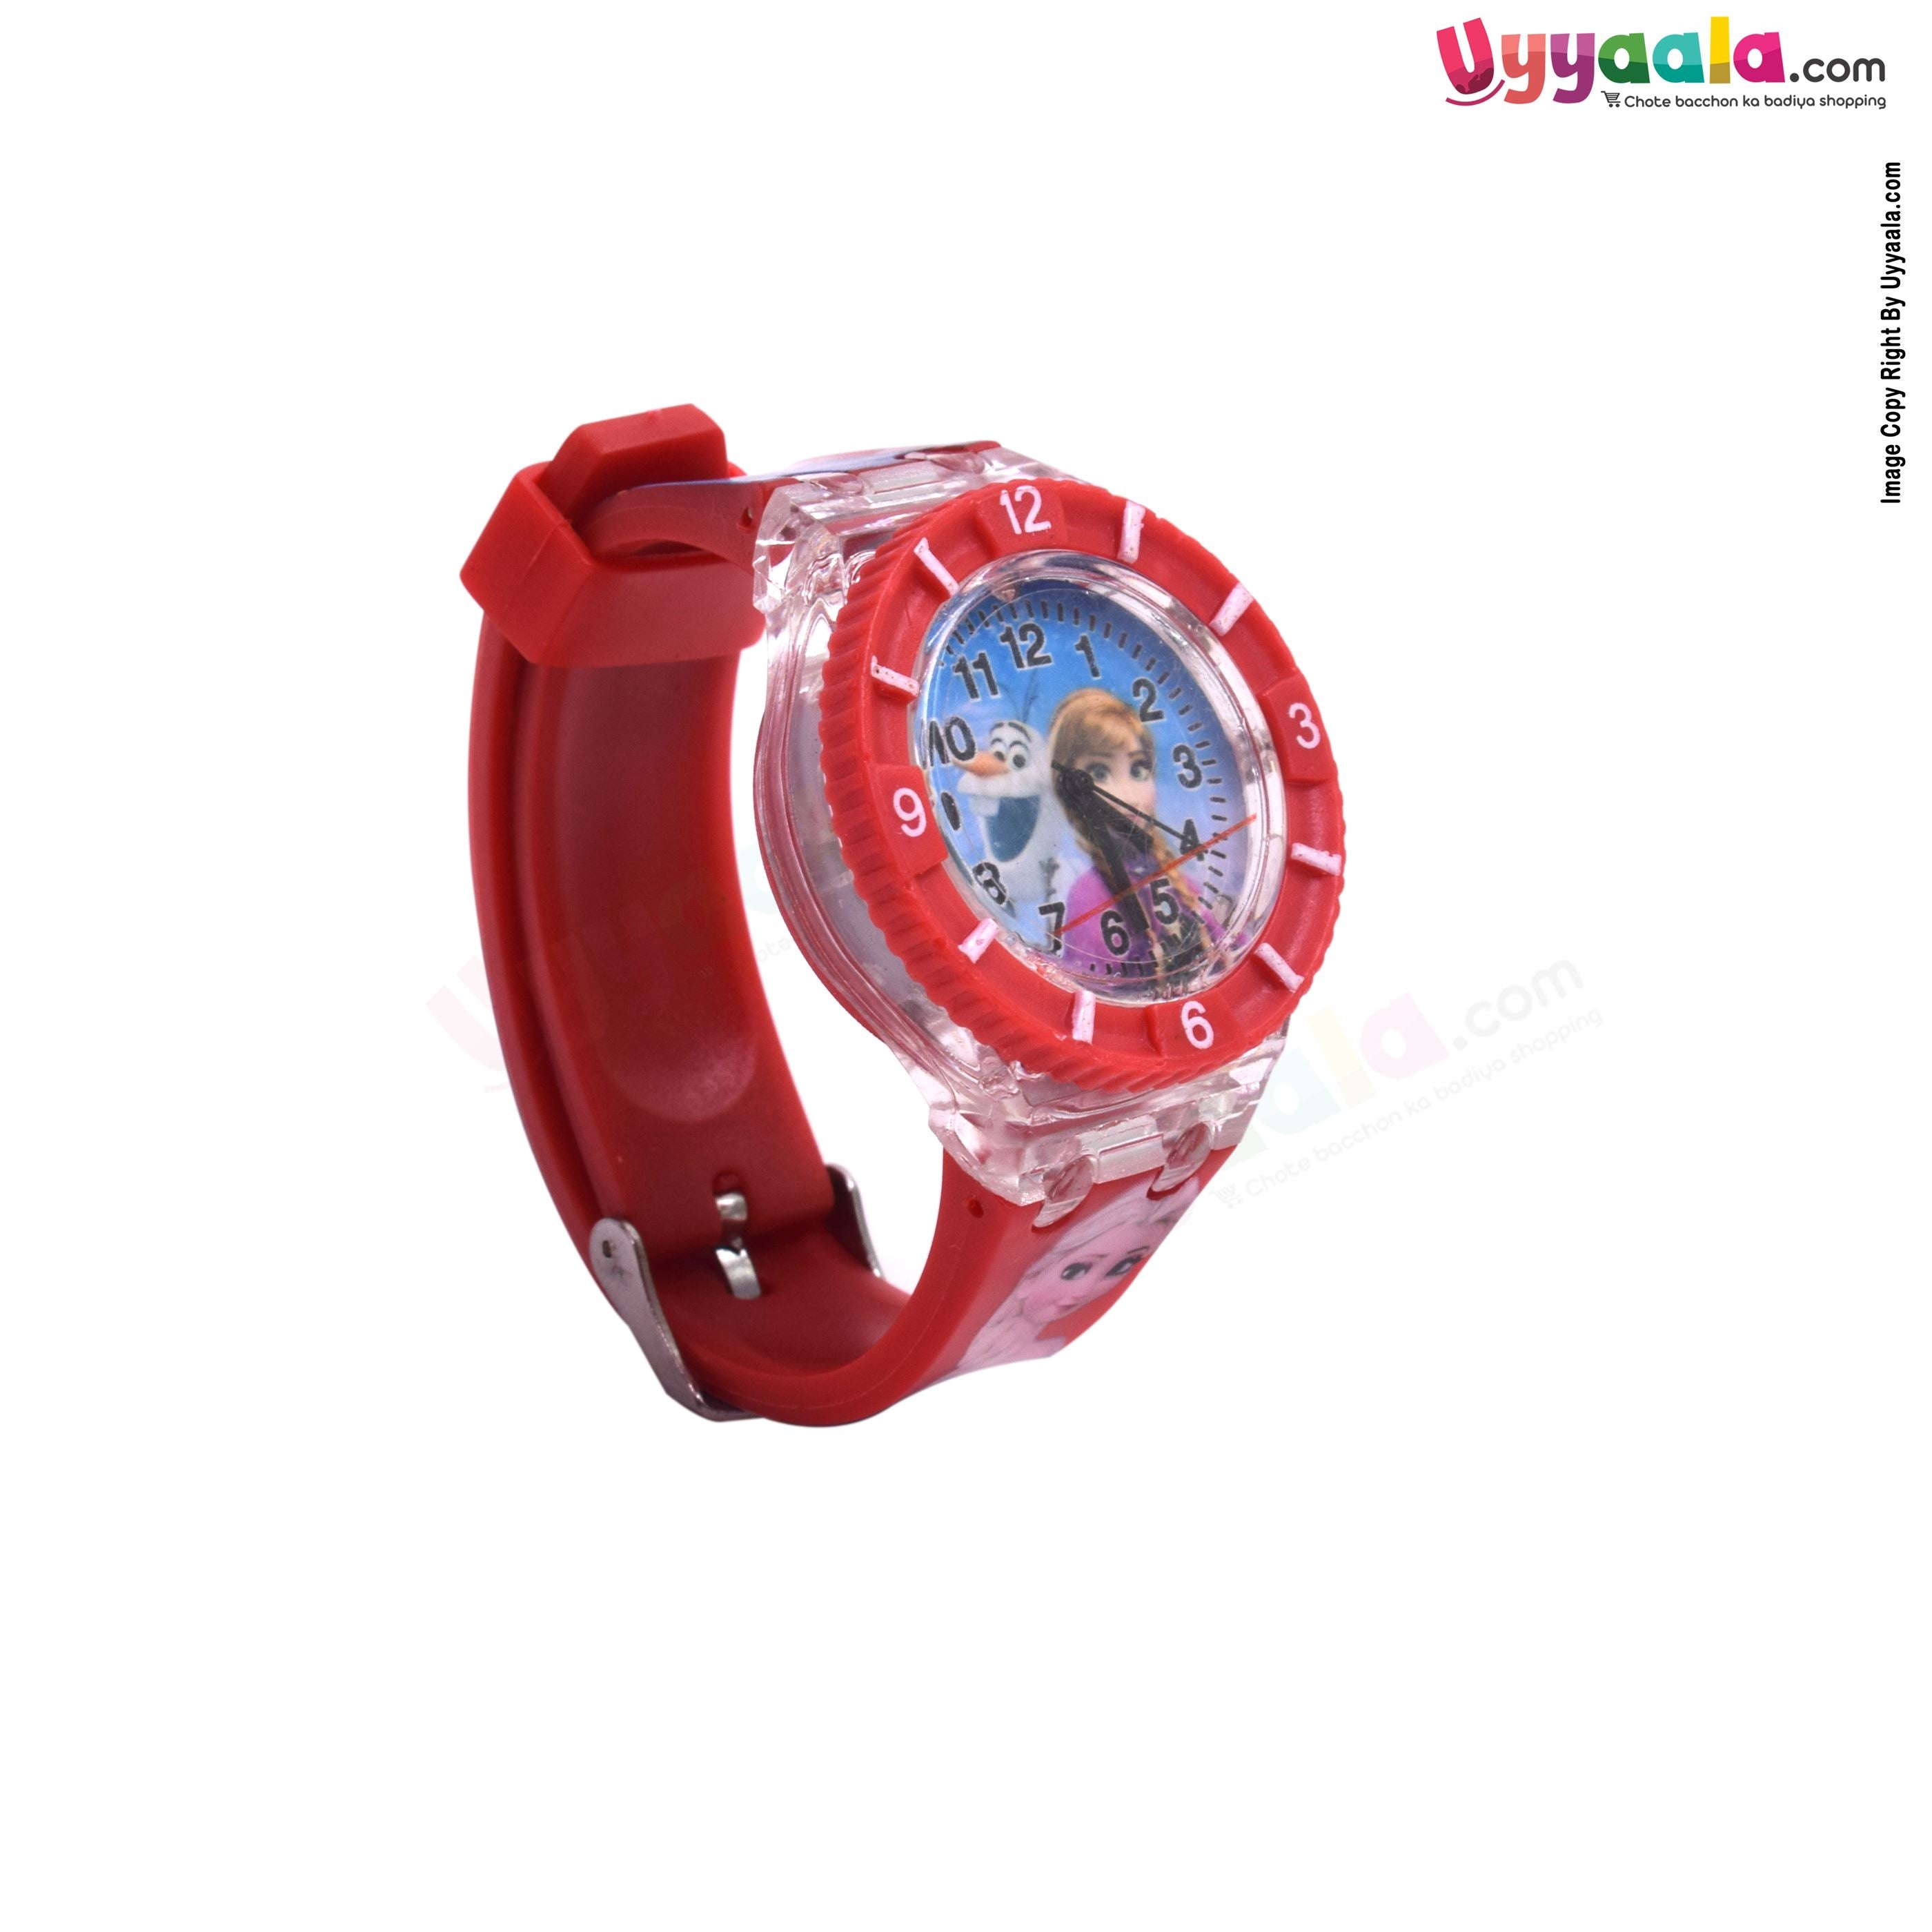 Frozen analog watch with led lightings for kids - red strap with frozen print